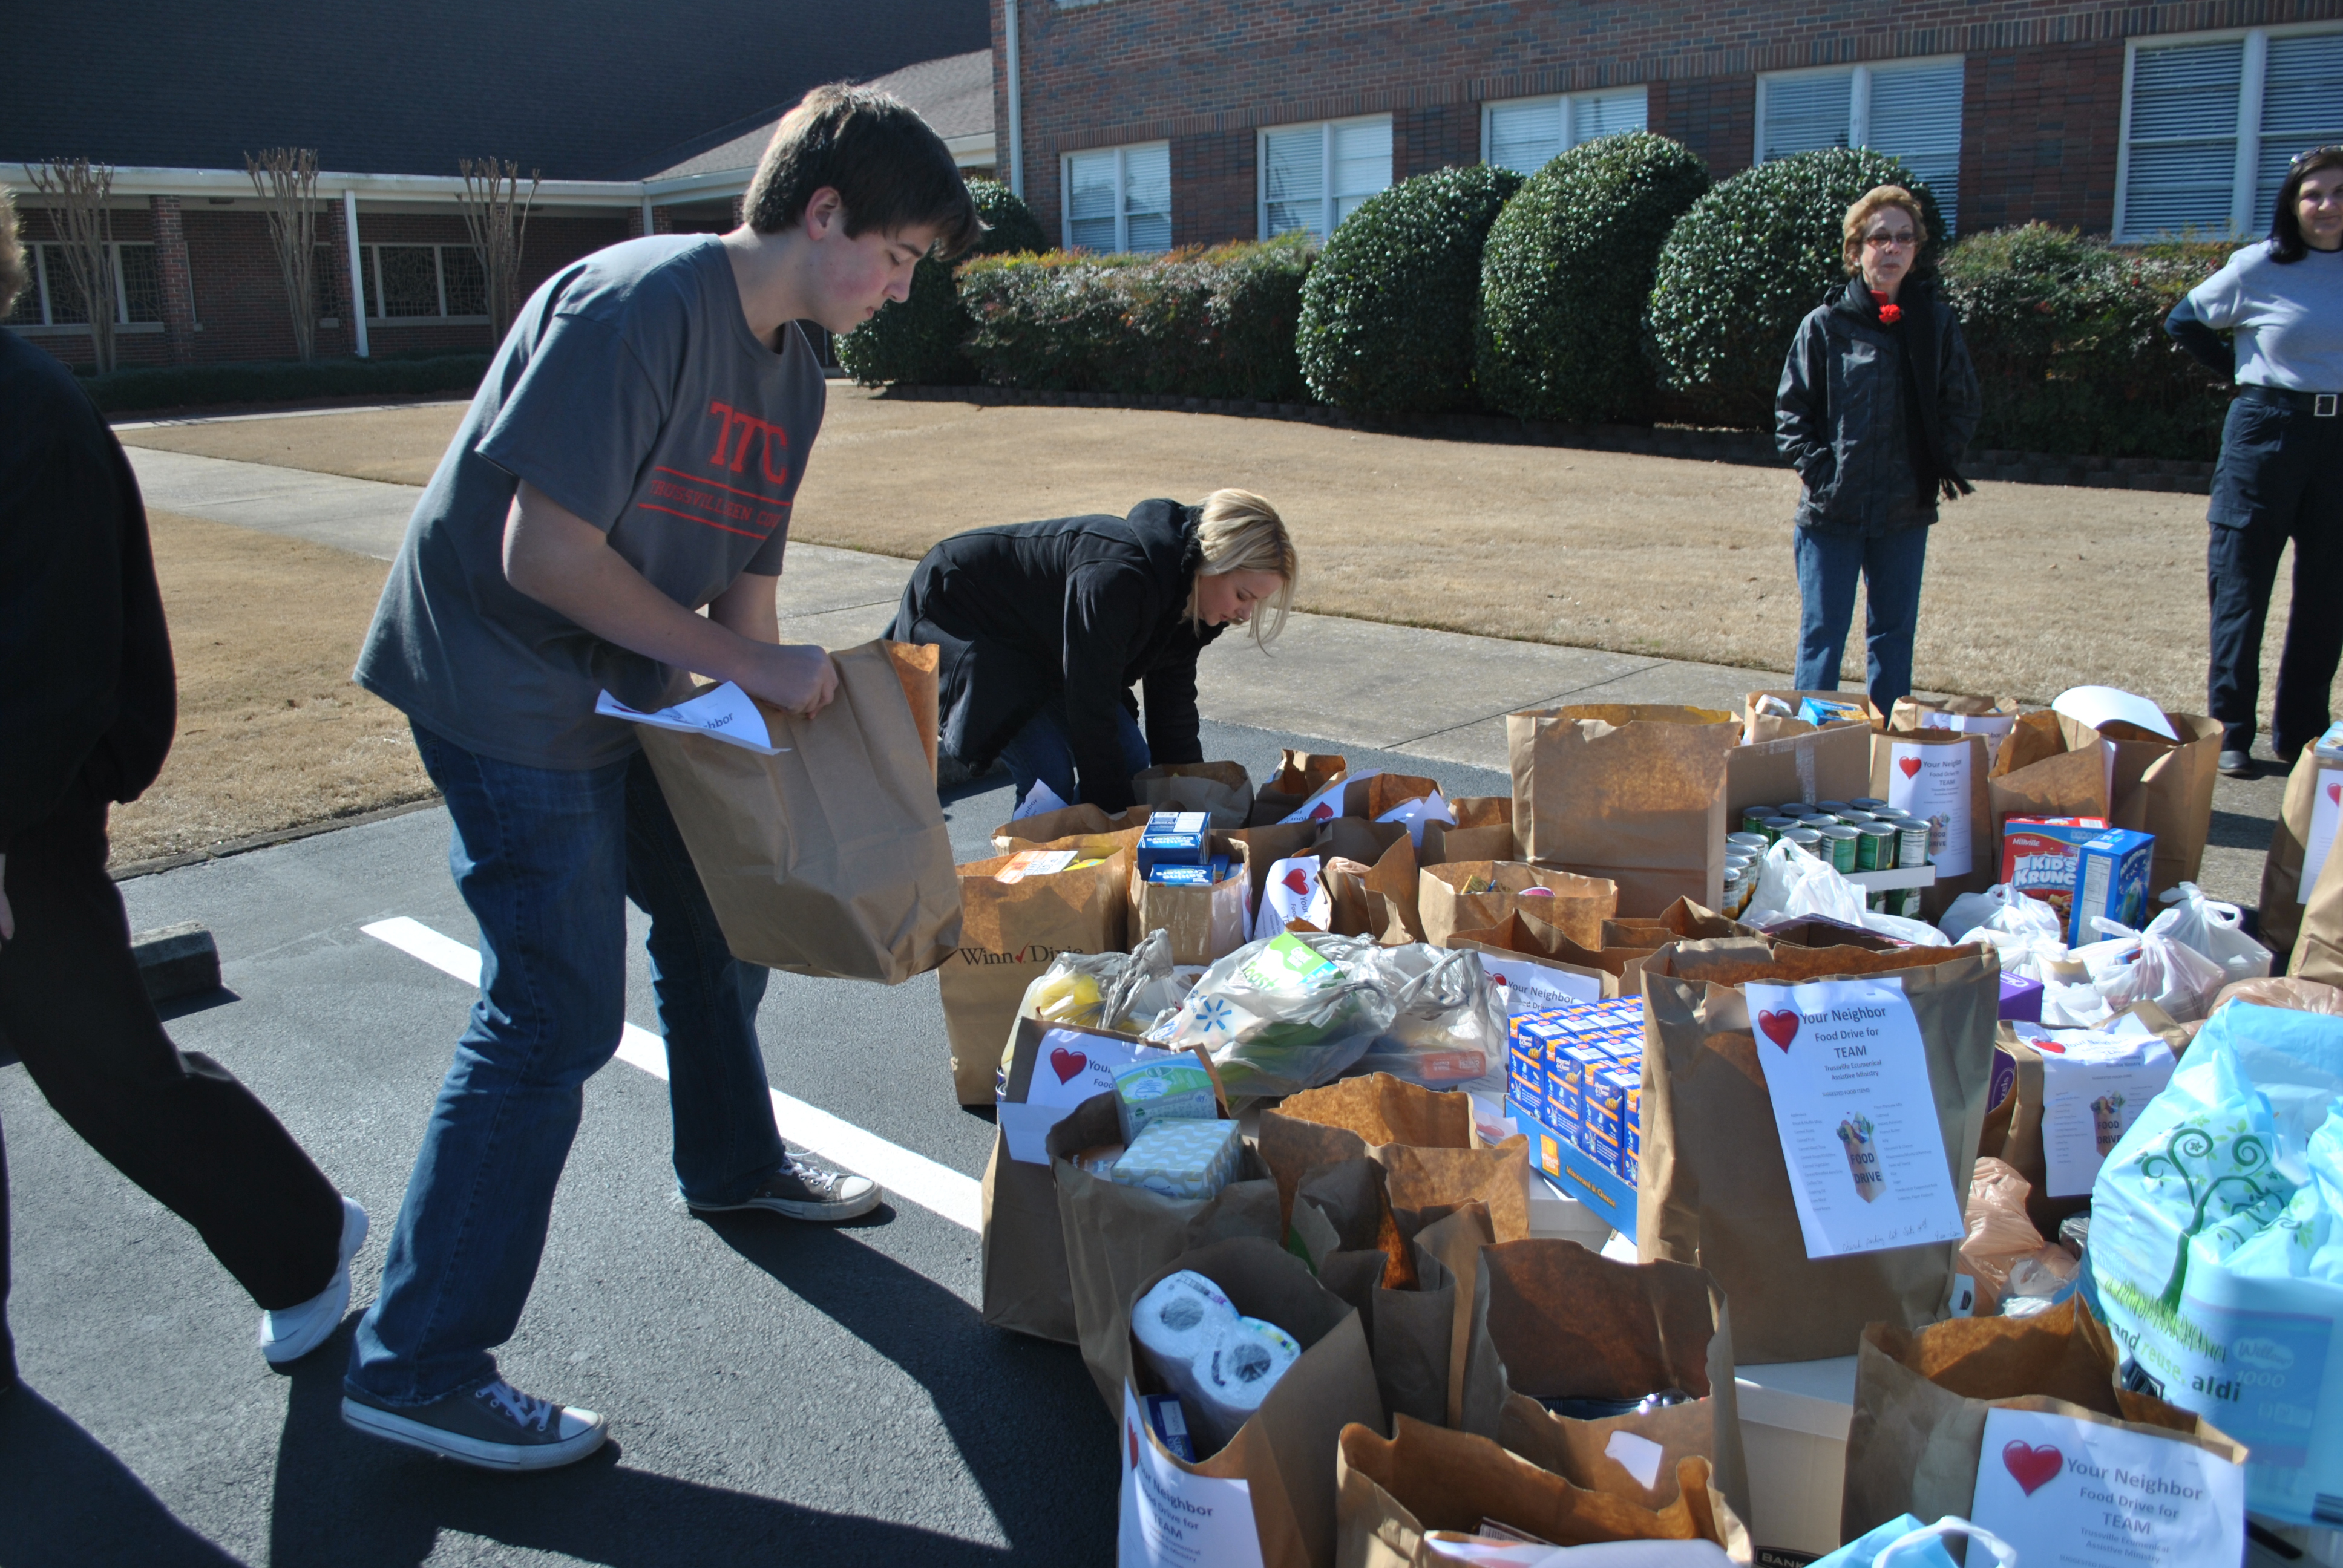 TEAM in Trussville asking for food donations